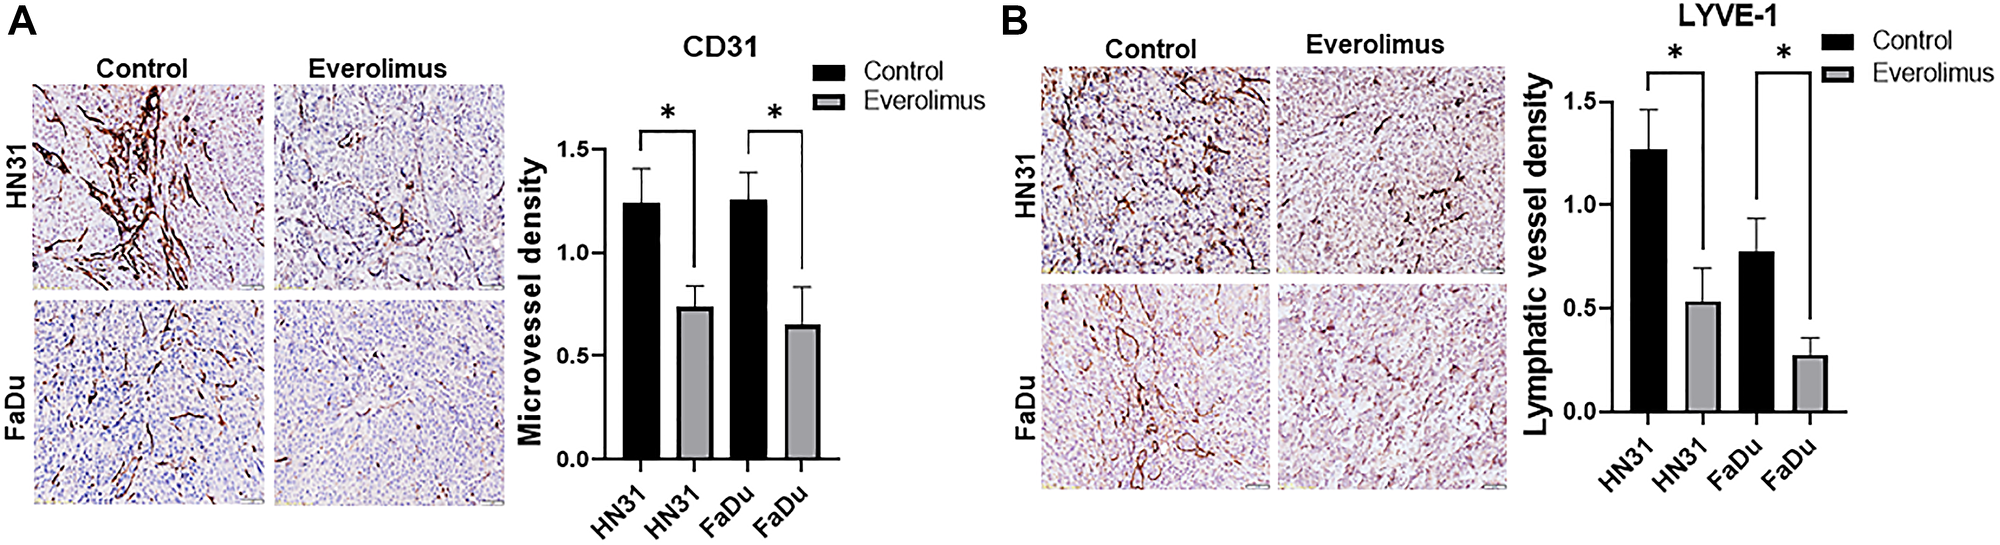 Everolimus reduces microvessel density (MVD) and lymphatic vessel density (LVD) in TP53 mutant HNSCC xenografts.